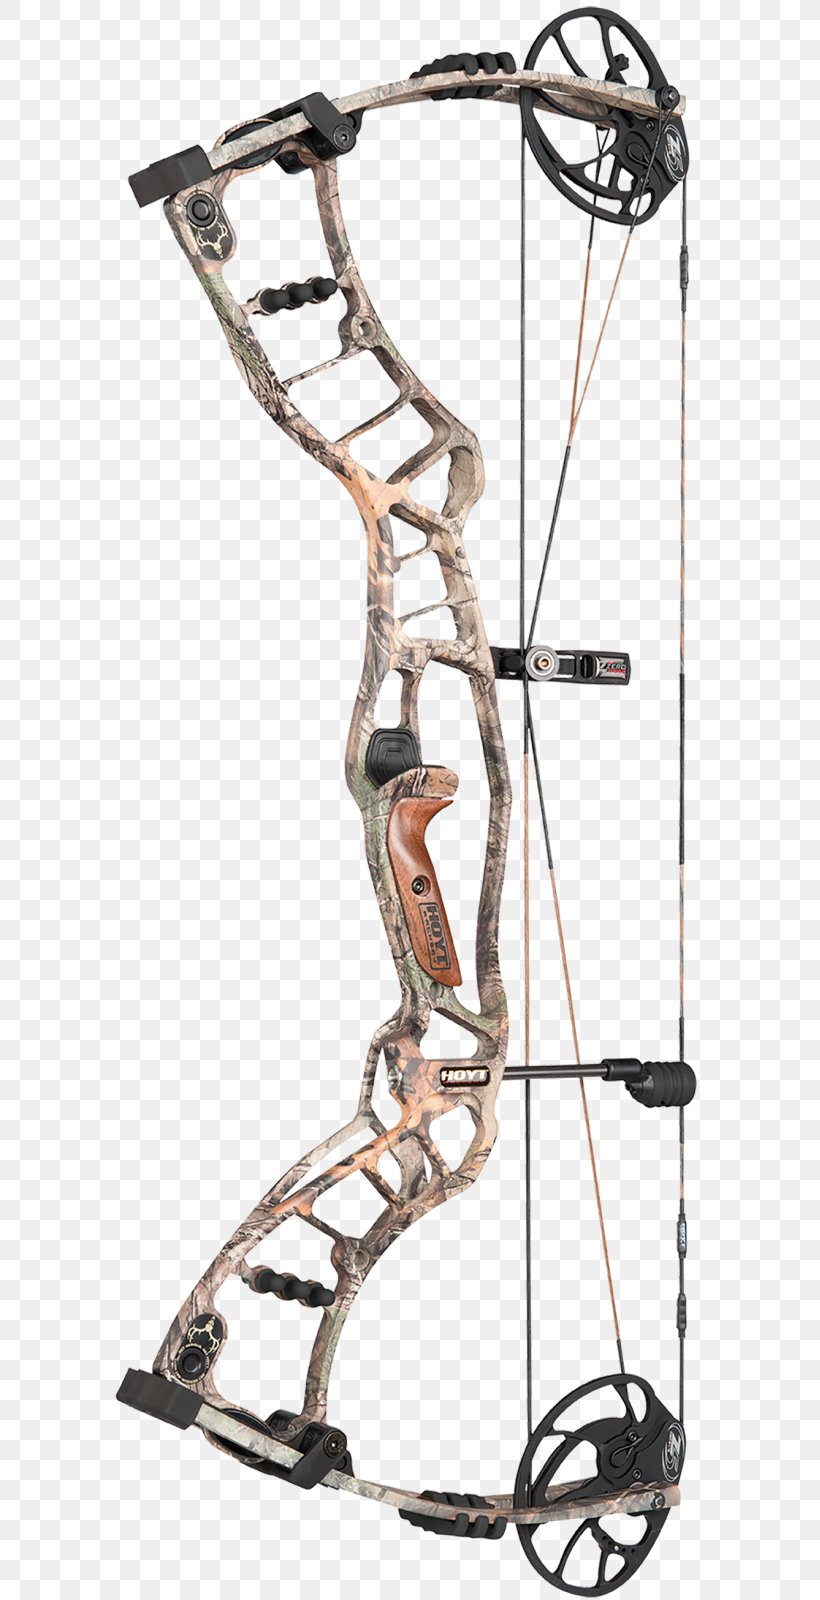 Compound Bows Archery Bow And Arrow Bowhunting, PNG, 613x1600px, Compound Bows, Archery, Bit, Bow, Bow And Arrow Download Free